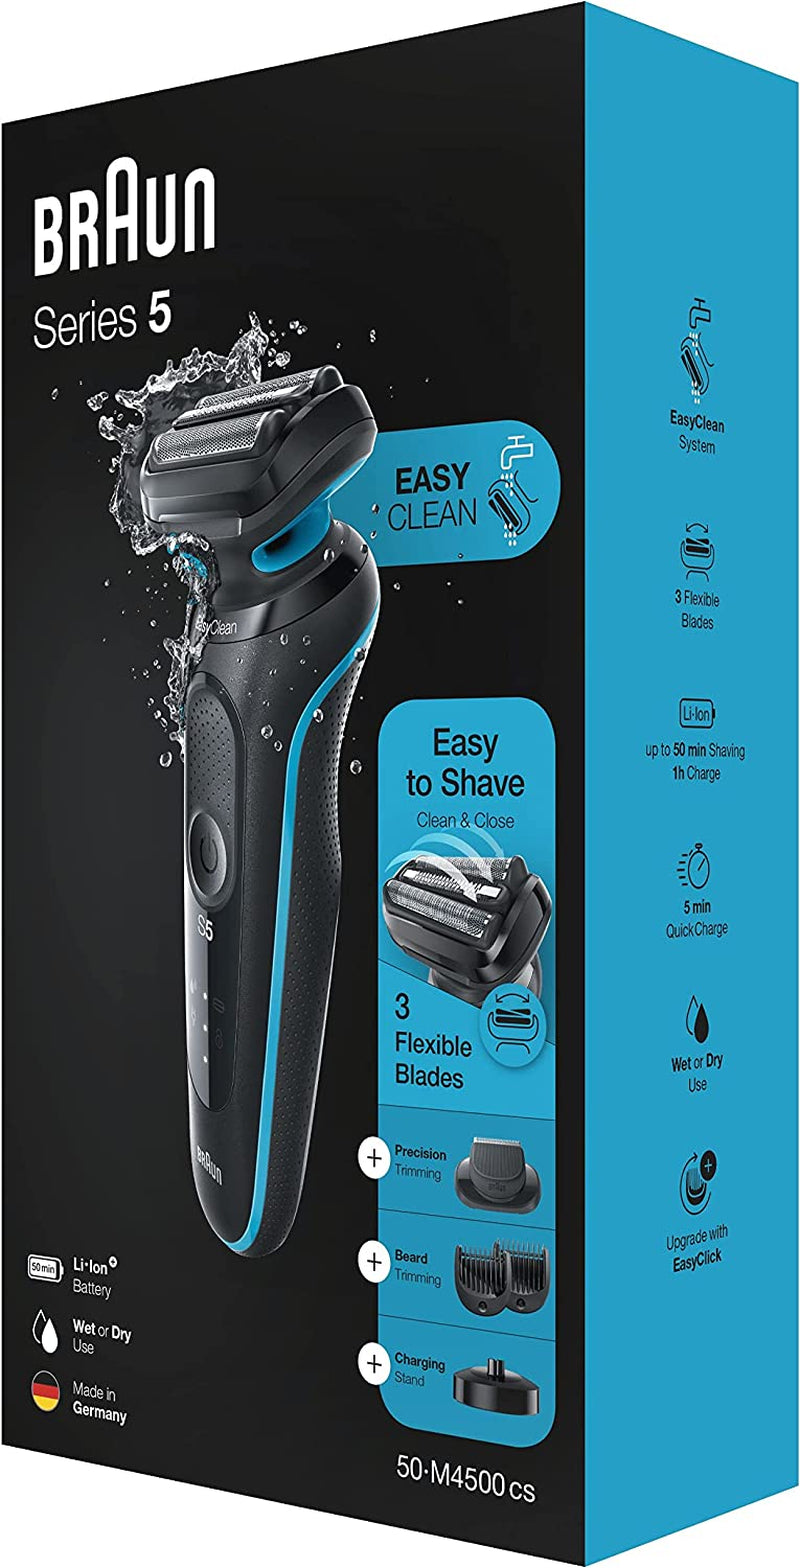 Series 5 Electric Shaver, with Beard Trimmer, Charging Stand, Wet & Dry, 100% Waterproof, Easy Clean System, 2 Pin Bathroom Plug, 50-M4500Cs, Mint Razor, Rated Which Best Buy